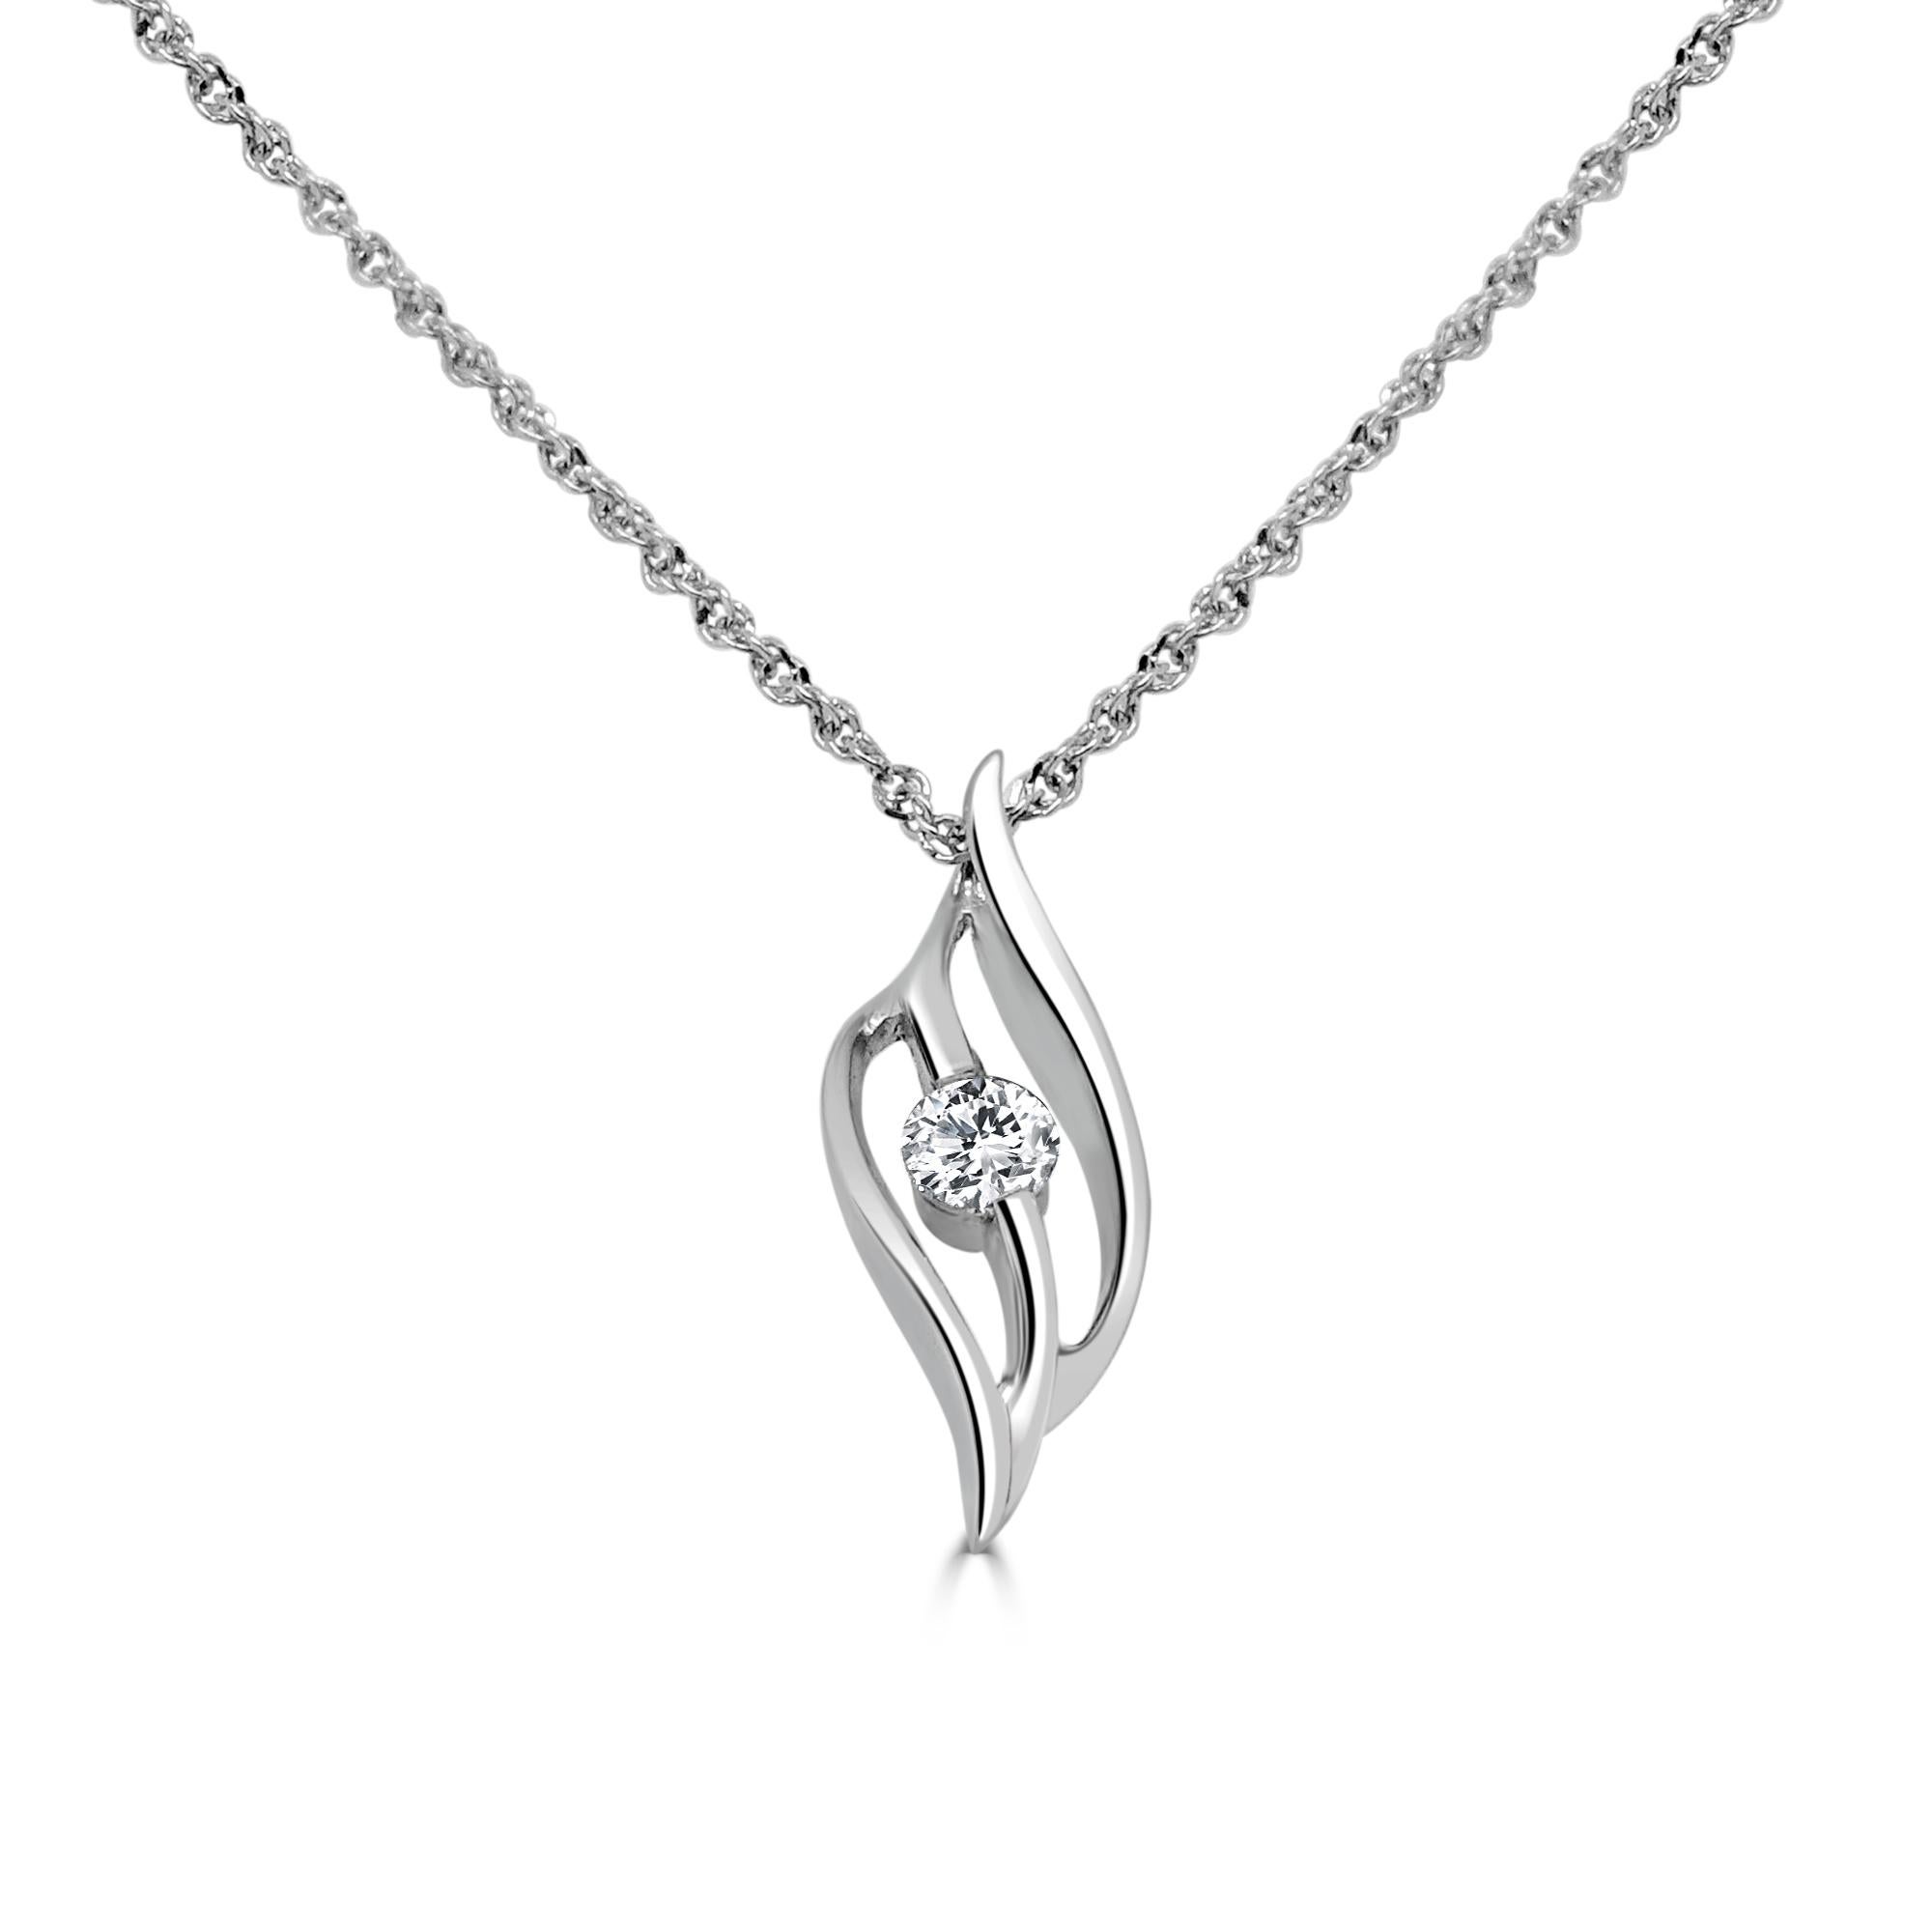 18 Karat White Gold 0.12 Carat Diamond Chain Necklace Wedding Fine Jewelry 

Gentle and elegant pendant is crafted in a sleek white gold. Featuring round cut diamonds, together totaling 0.12 TCW . Suspended from a 16-inch stunning non-tangle, non